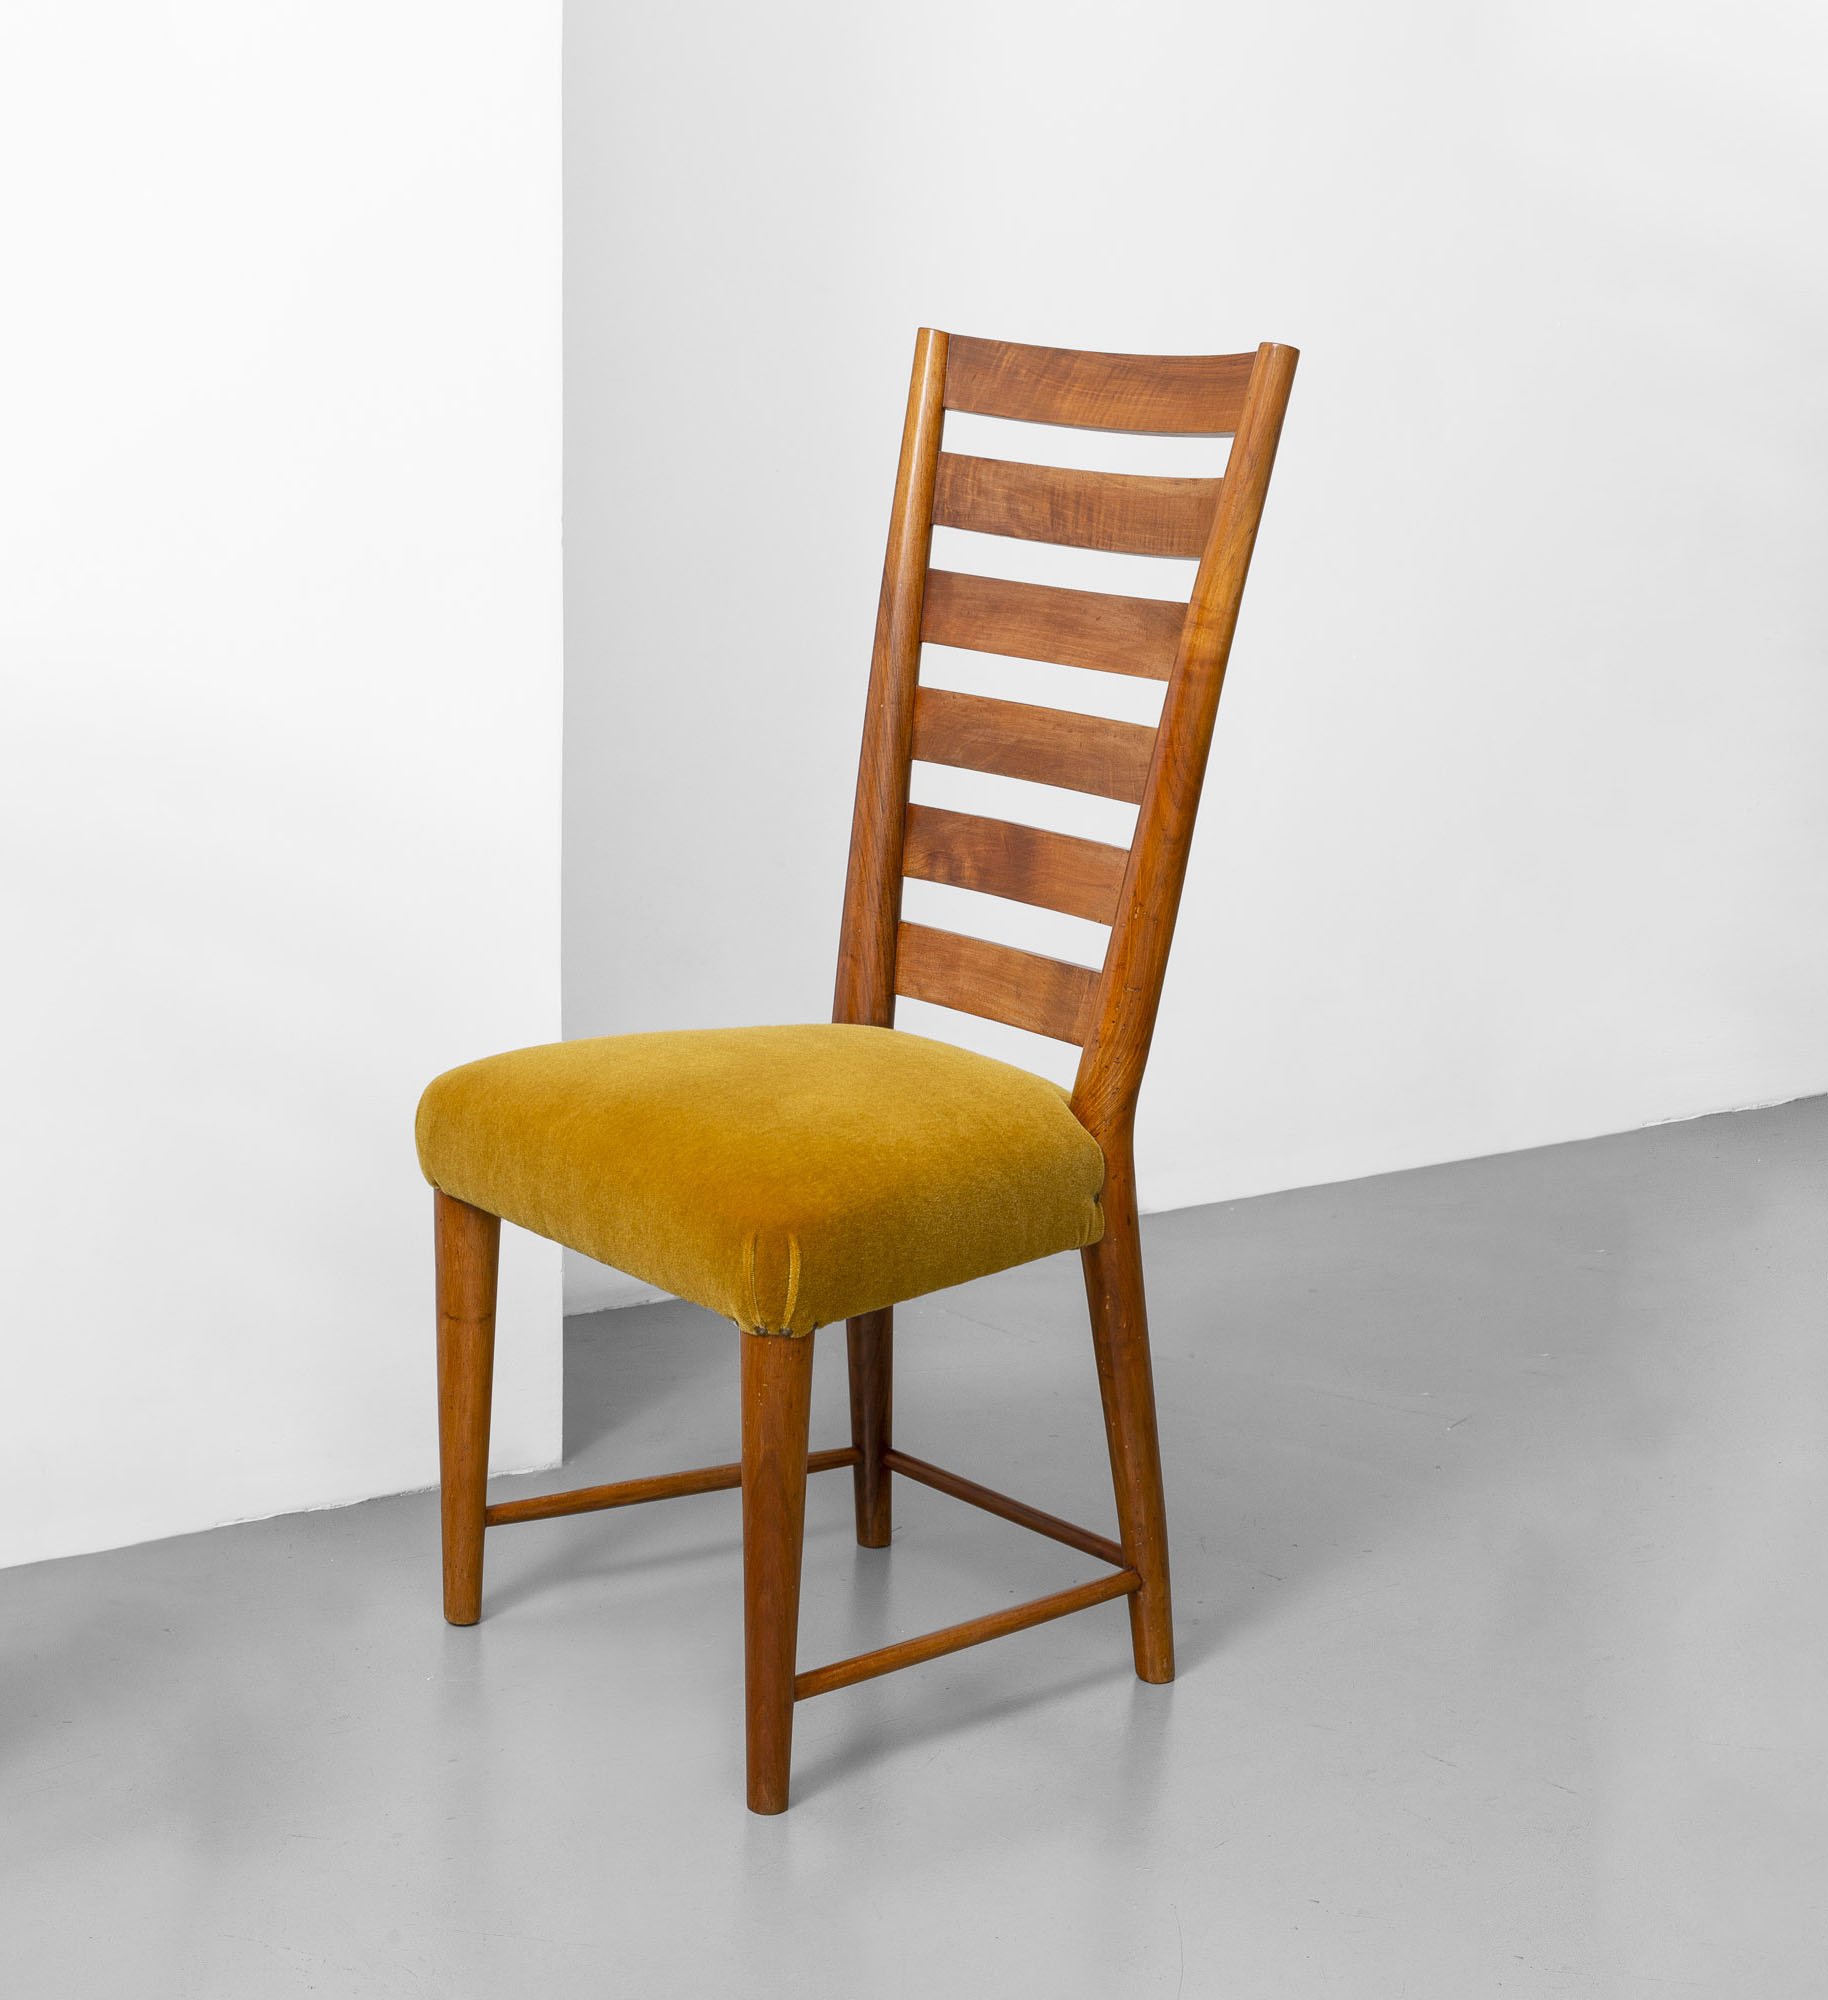 Chair from University of Padua